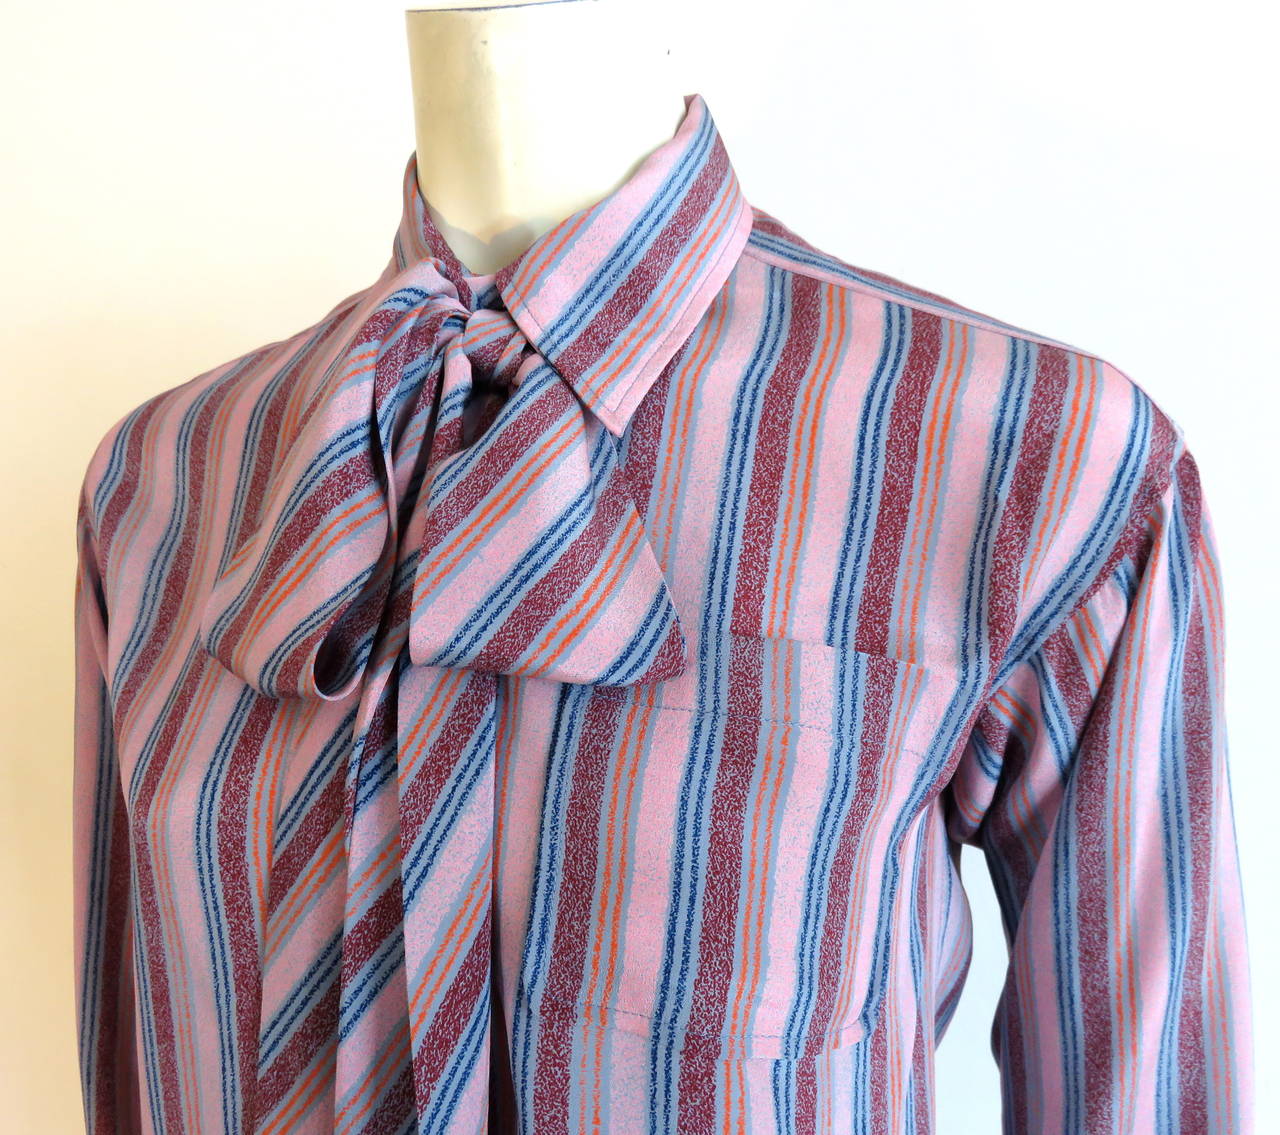 1970's YVES SAINT LAURENT striped silk shirt & matching scarf.

Burgundy, tangerine, navy, and turquoise, crayon-style striped artwork onto mauve ground.

Lightweight, silk fabrication.

Pop-over style silhouette with button placket down to